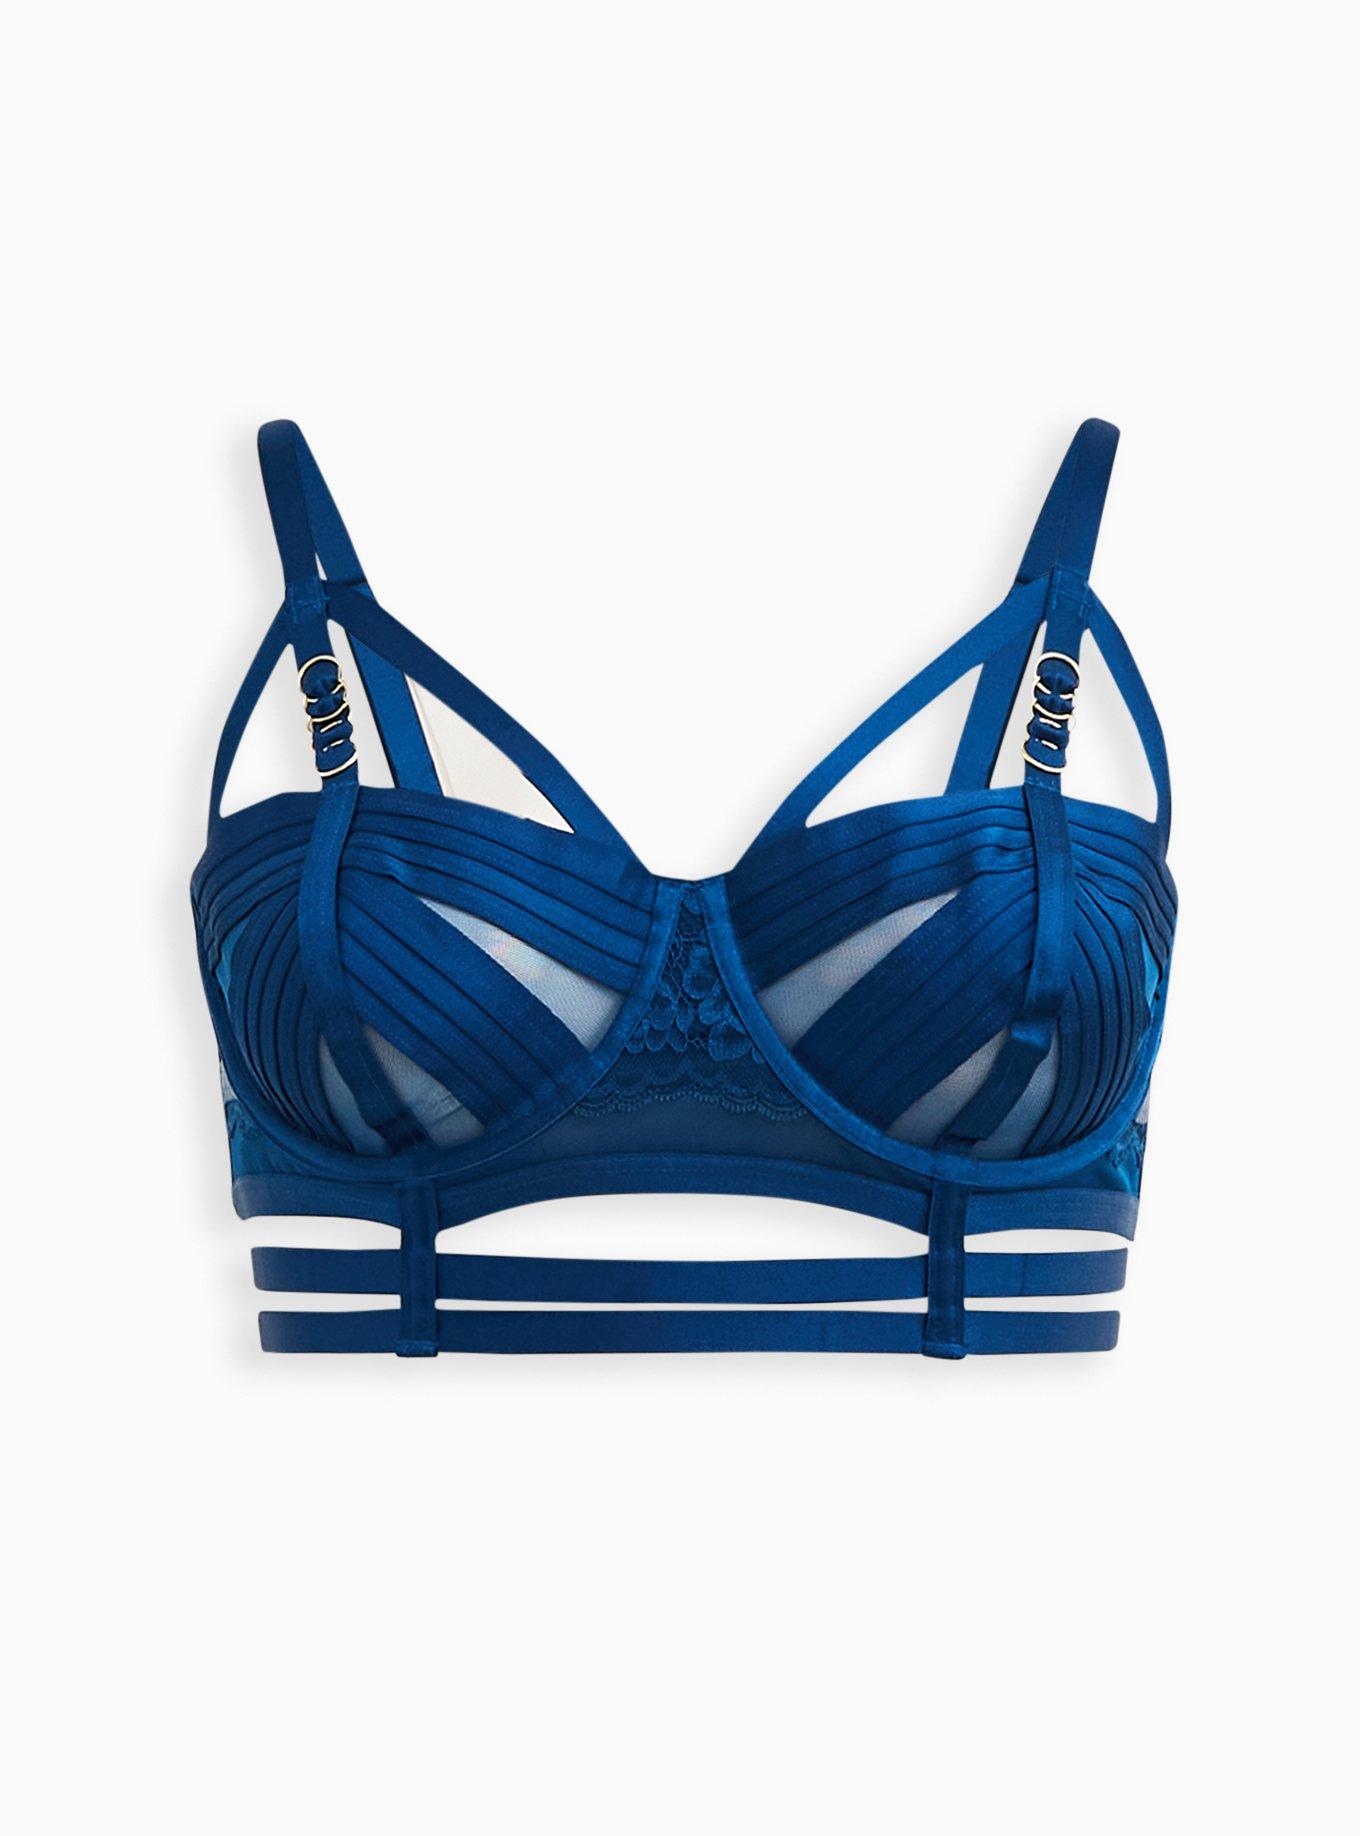 Torrid sapphire blue & grey lace strappy push-up strapless bra